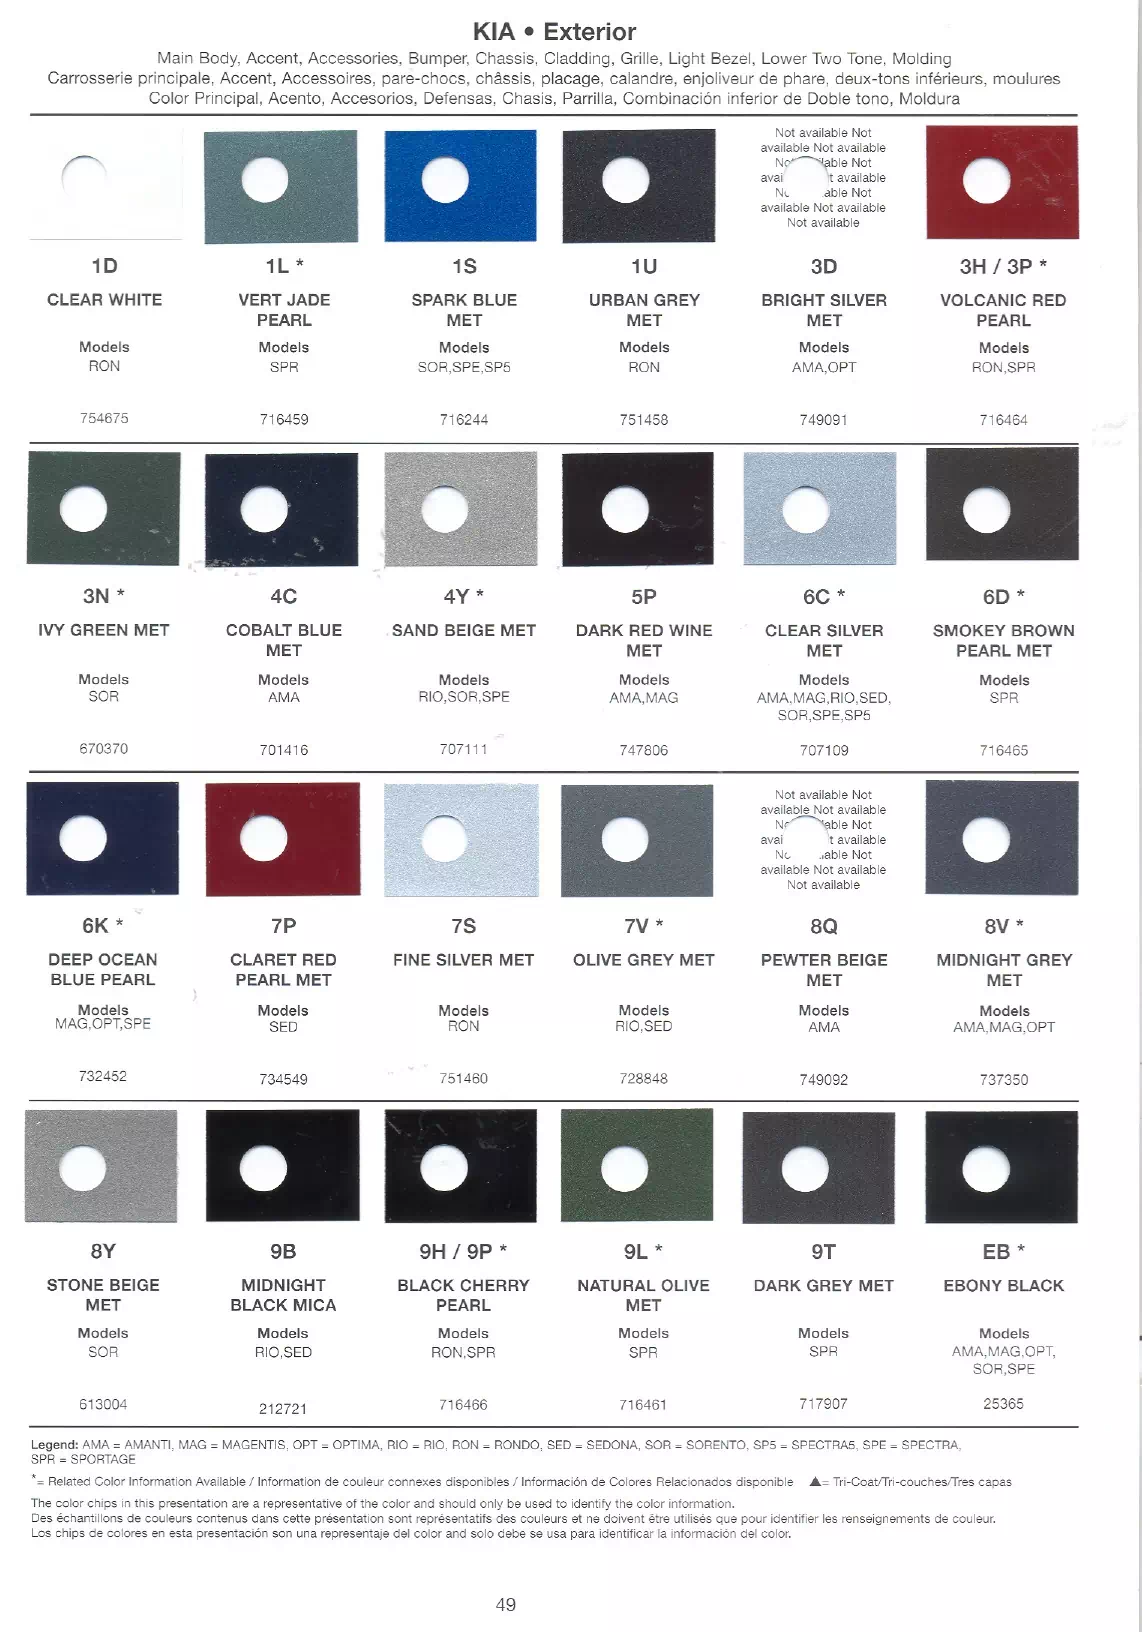 paint swatches with paint codes in text for 2007 kias